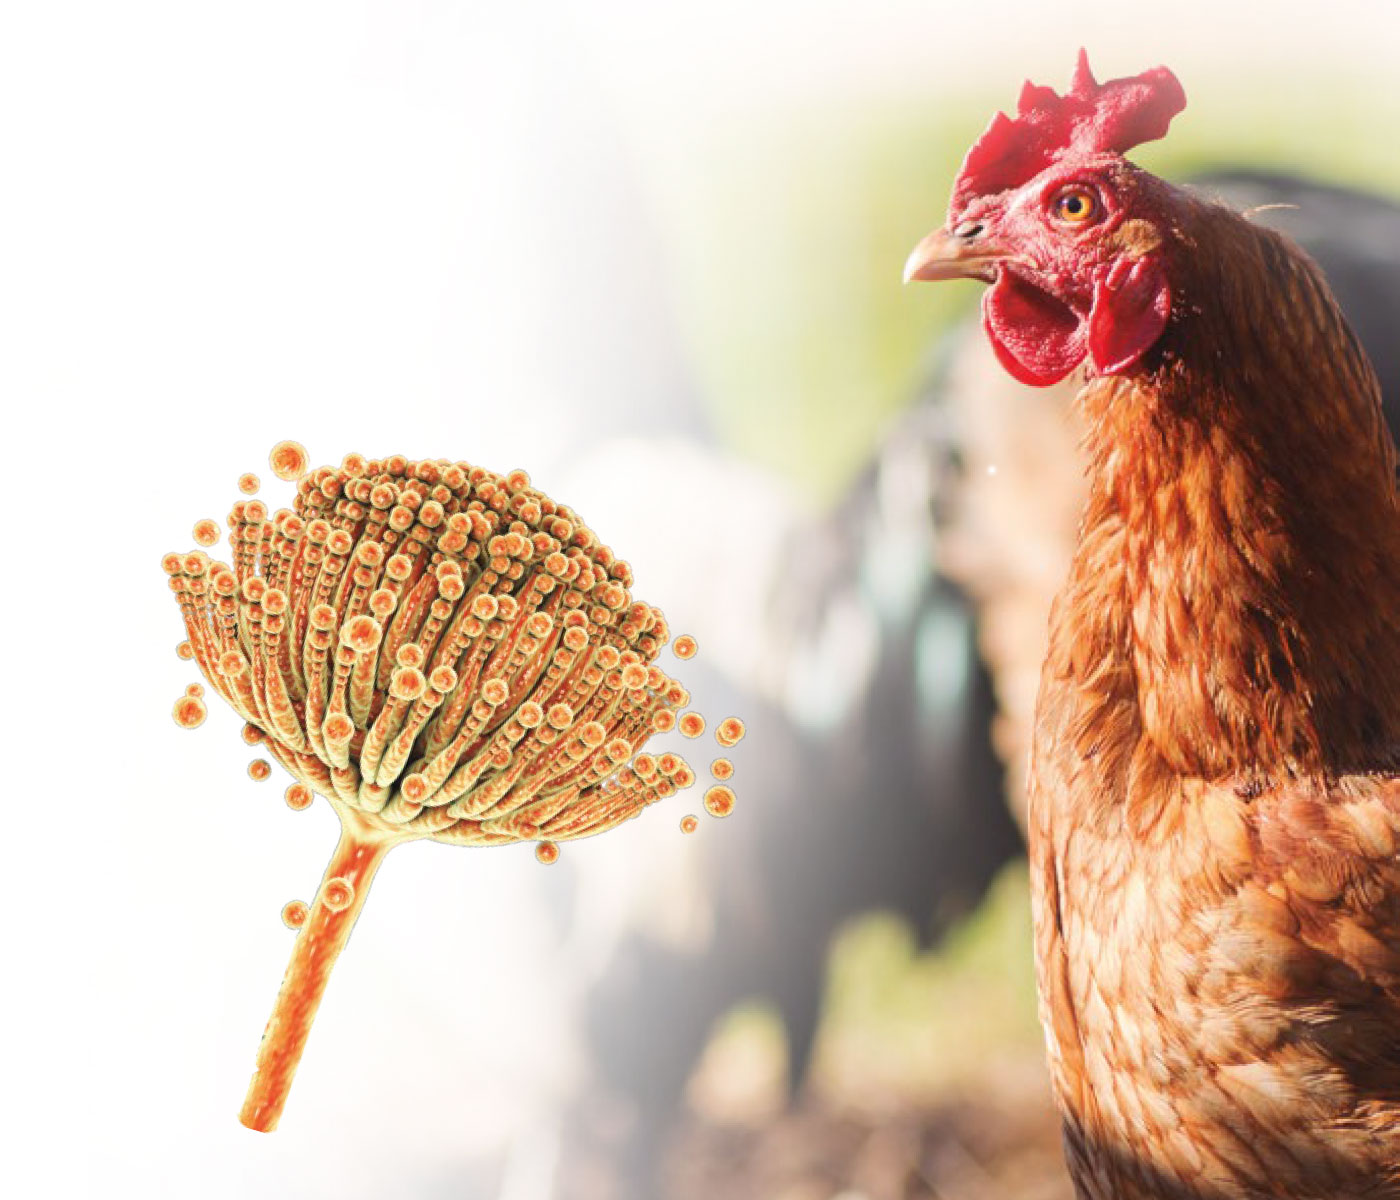 Agricultural residues as an alternative for mycotoxin decontamination